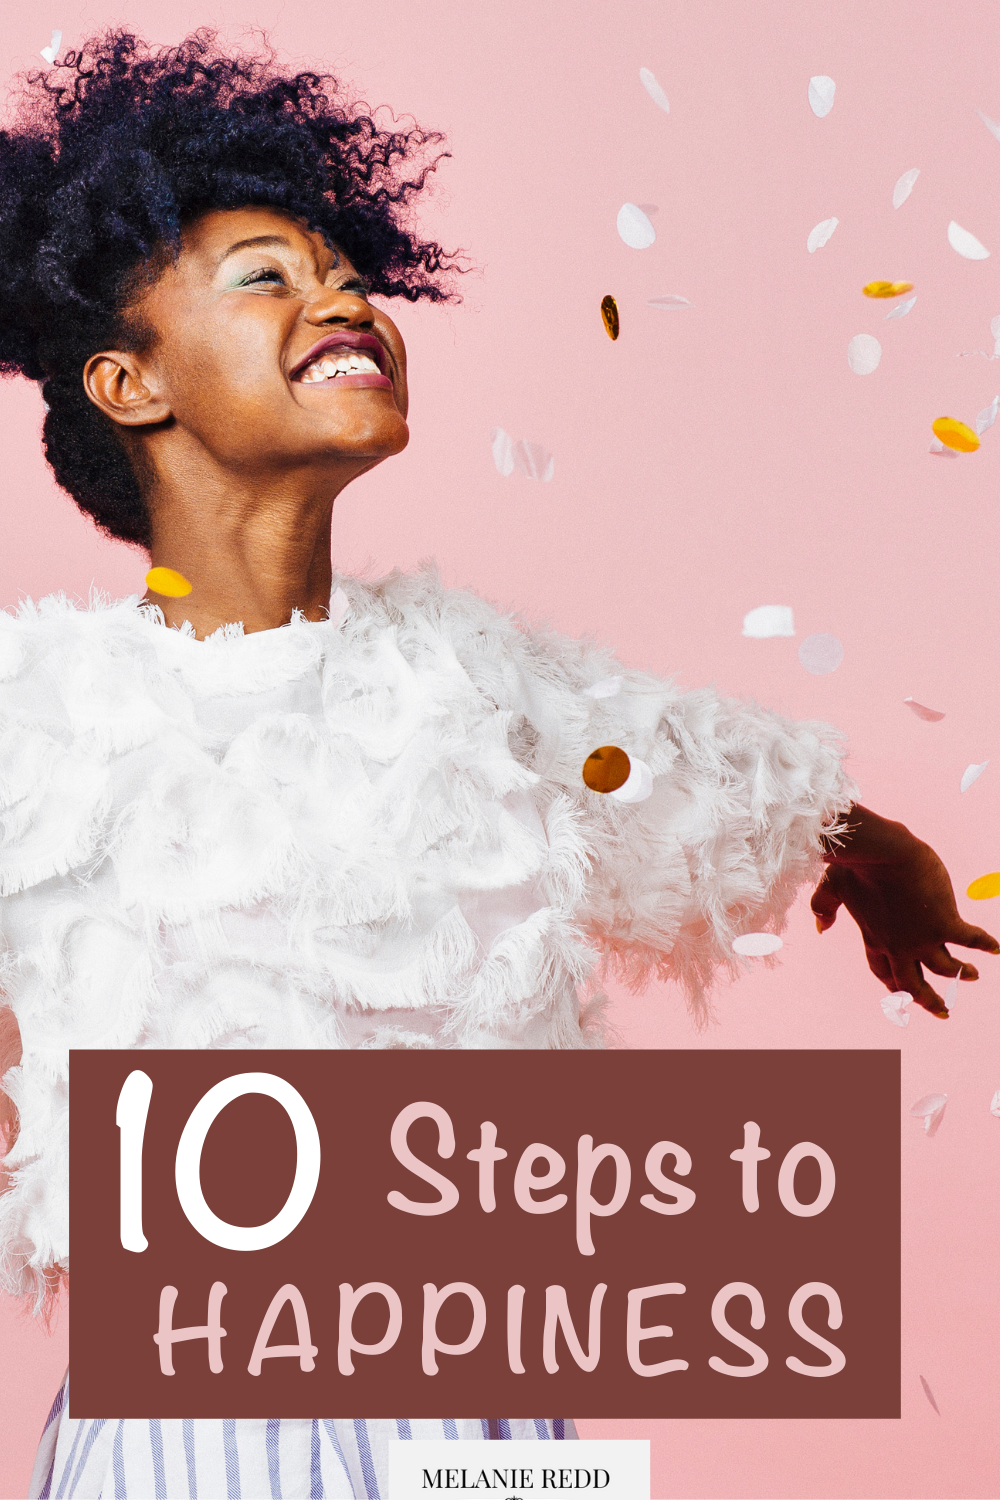 Would you like to have more joy in your life? Smile and enjoy life more? Here are 10 steps to happiness - practical ways to improve your life.